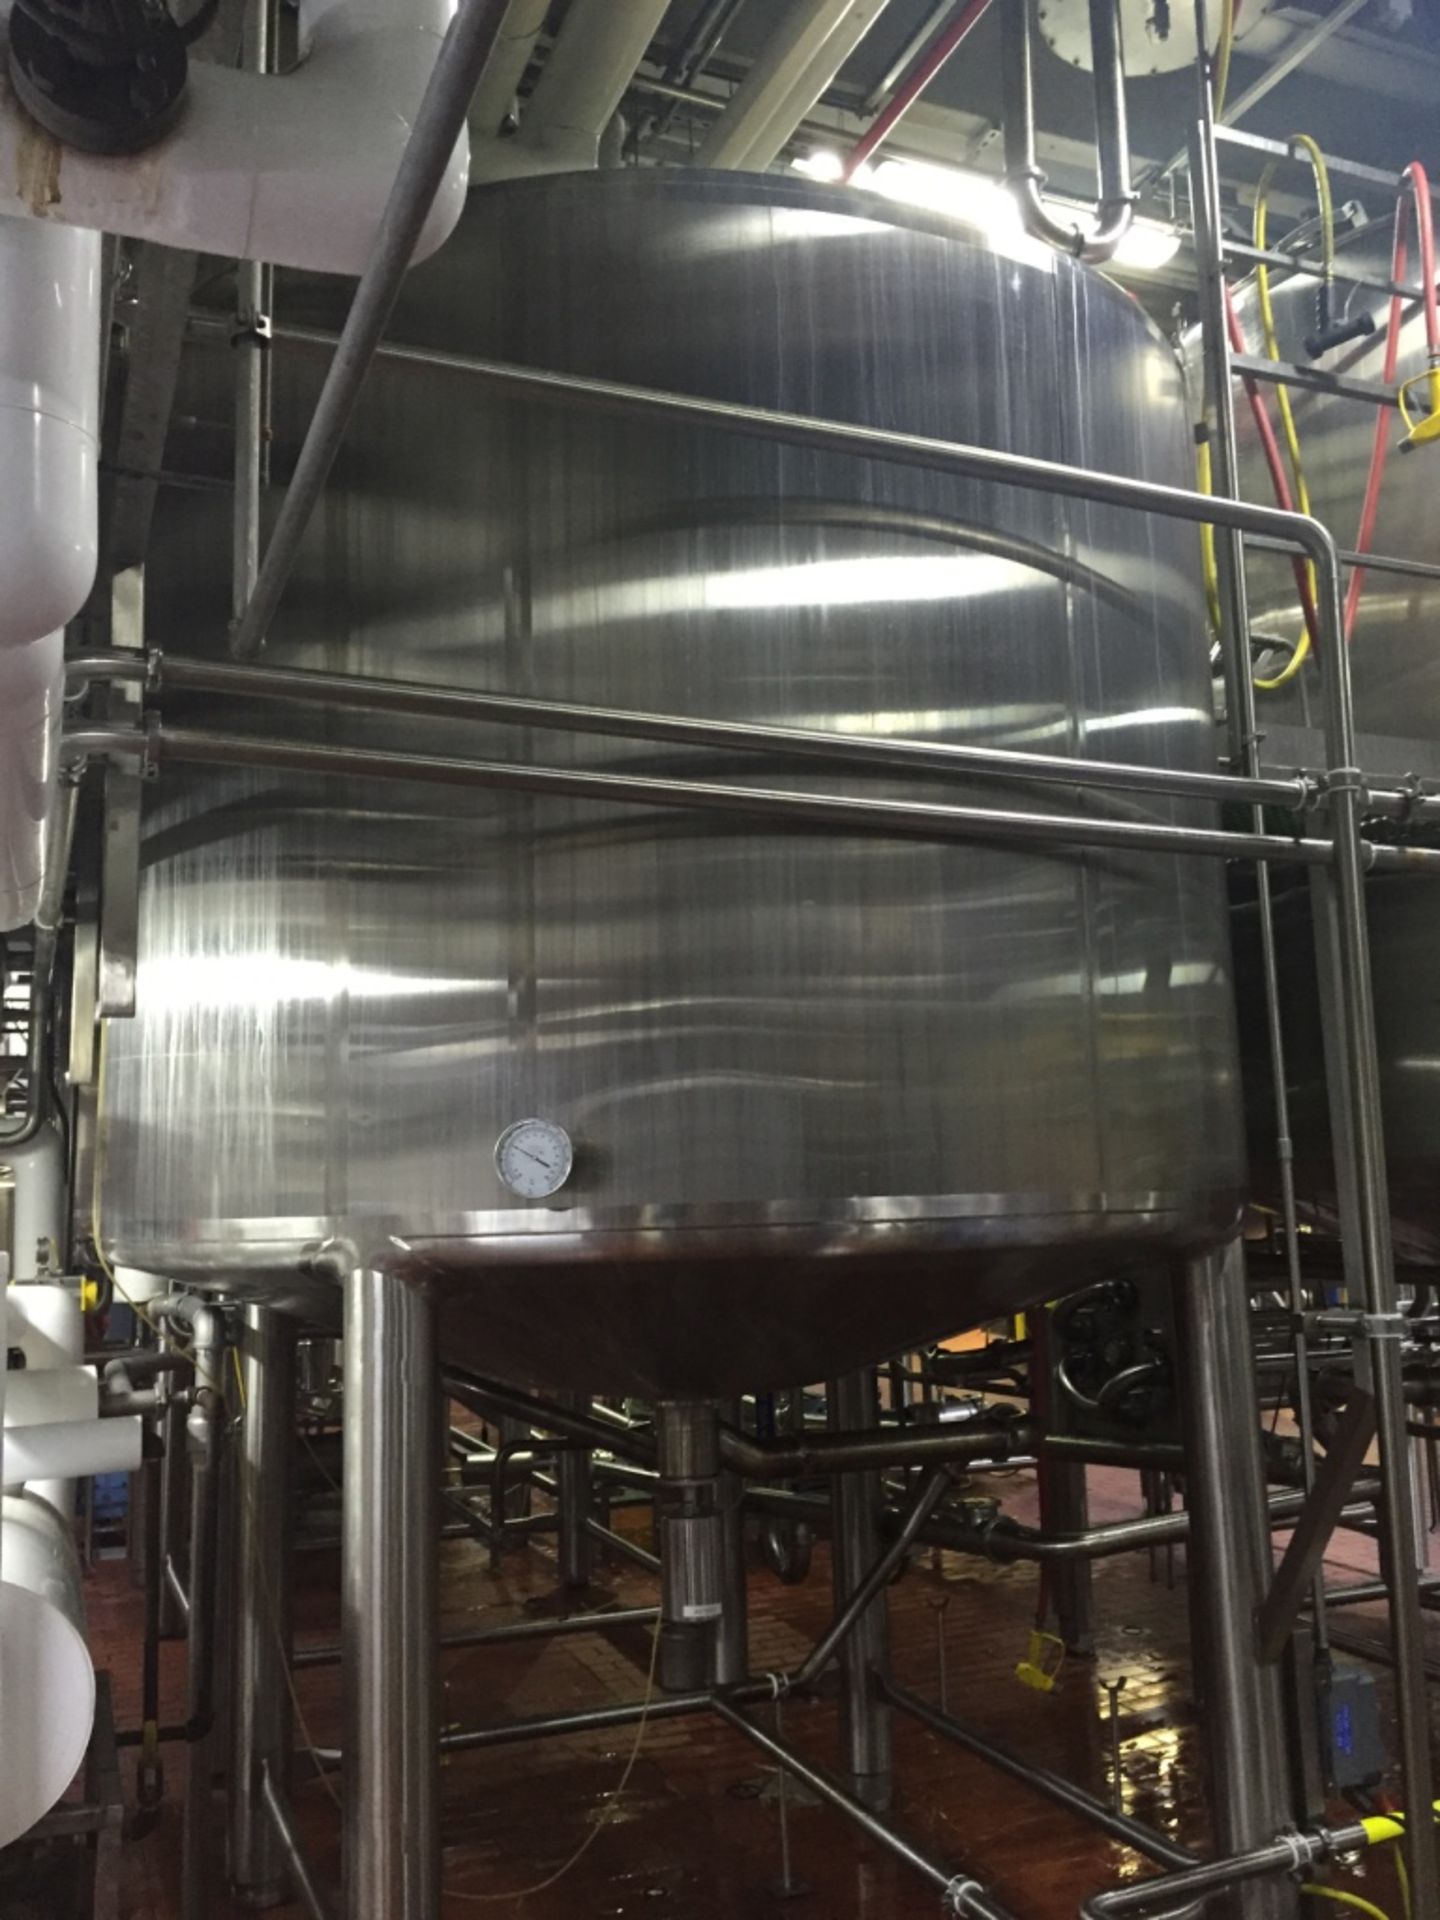 SFI (Stainless Fabrication Incorporated) 3000 Gallon Fermentation Tank S/N 5133 Atmos - Rigging Fee